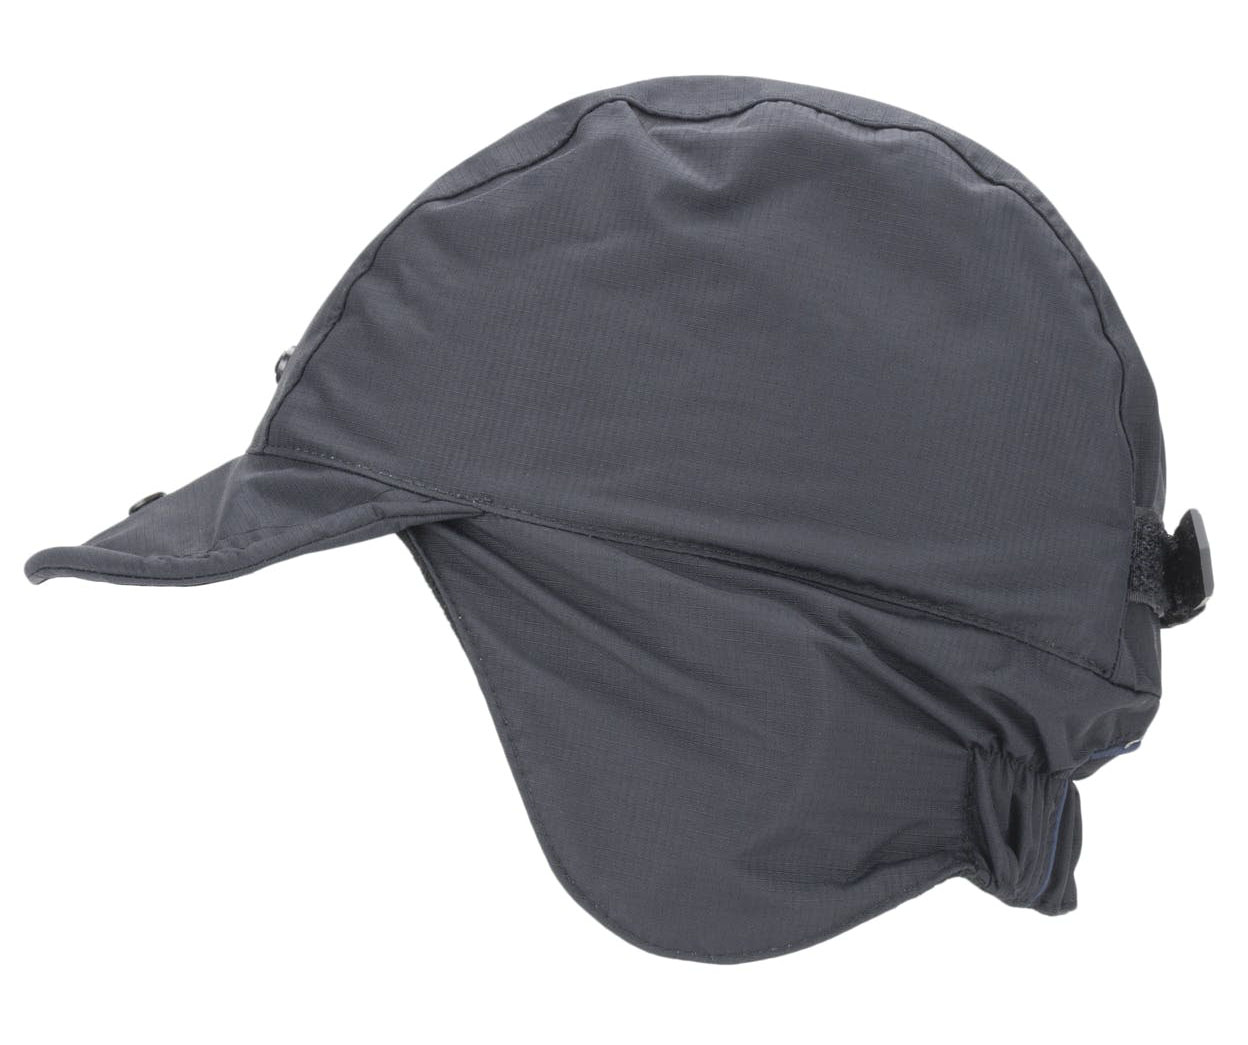 SealSkinz Waterproof Extreme Cold Weather Hat/Cap